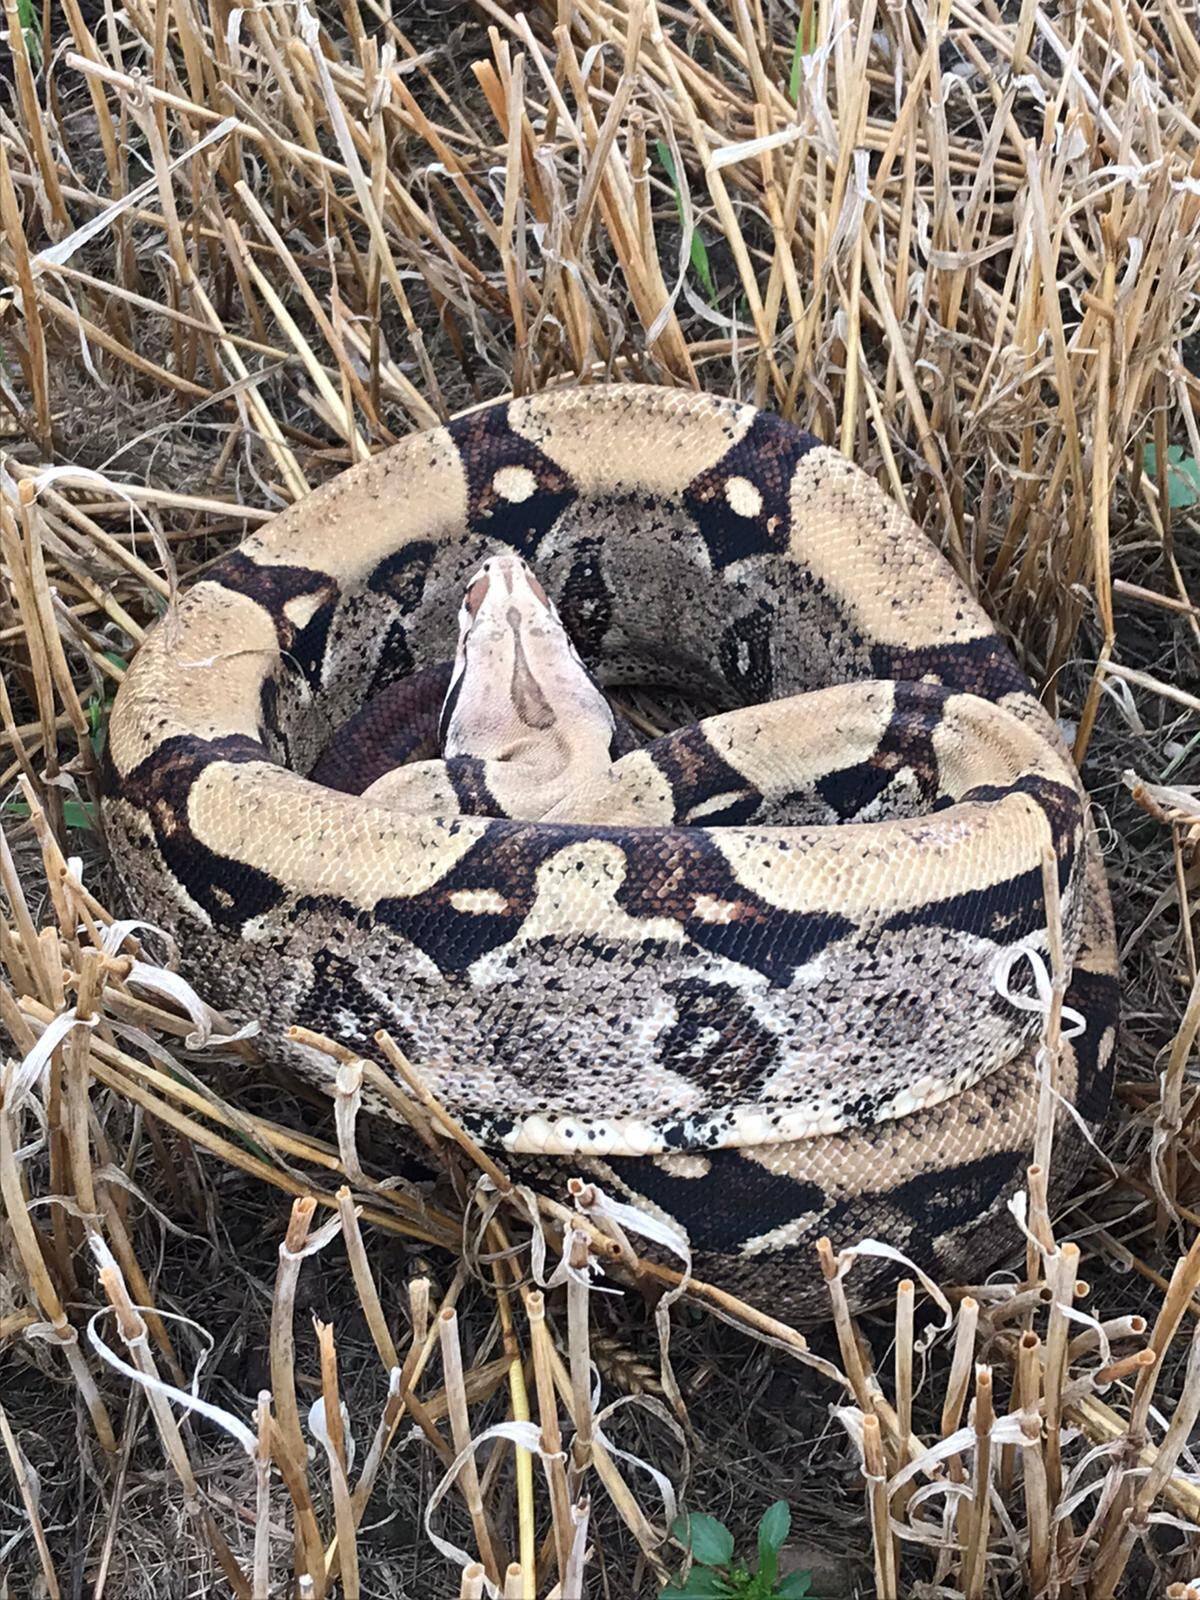 The snake was found in a field near Baschurch five days after another boa constrictor was discovered. Photo: Andy Bucknall